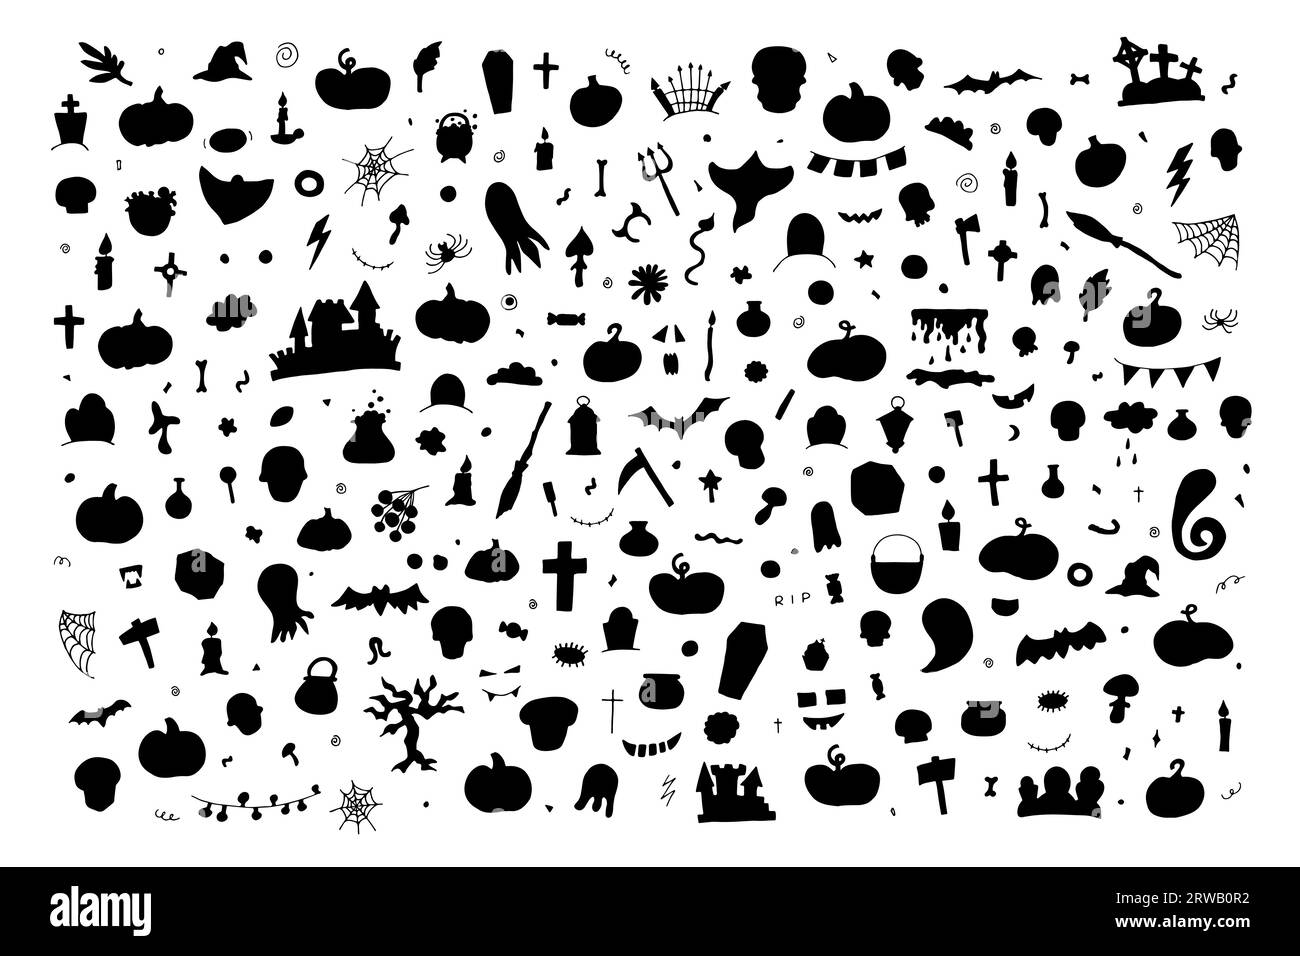 Doodle Halloween silhouette set. Hand-drawn autumn pumpkin, grave, ghost, cross, eye on white background. Cute scary horror banner for fall holidays, Stock Vector